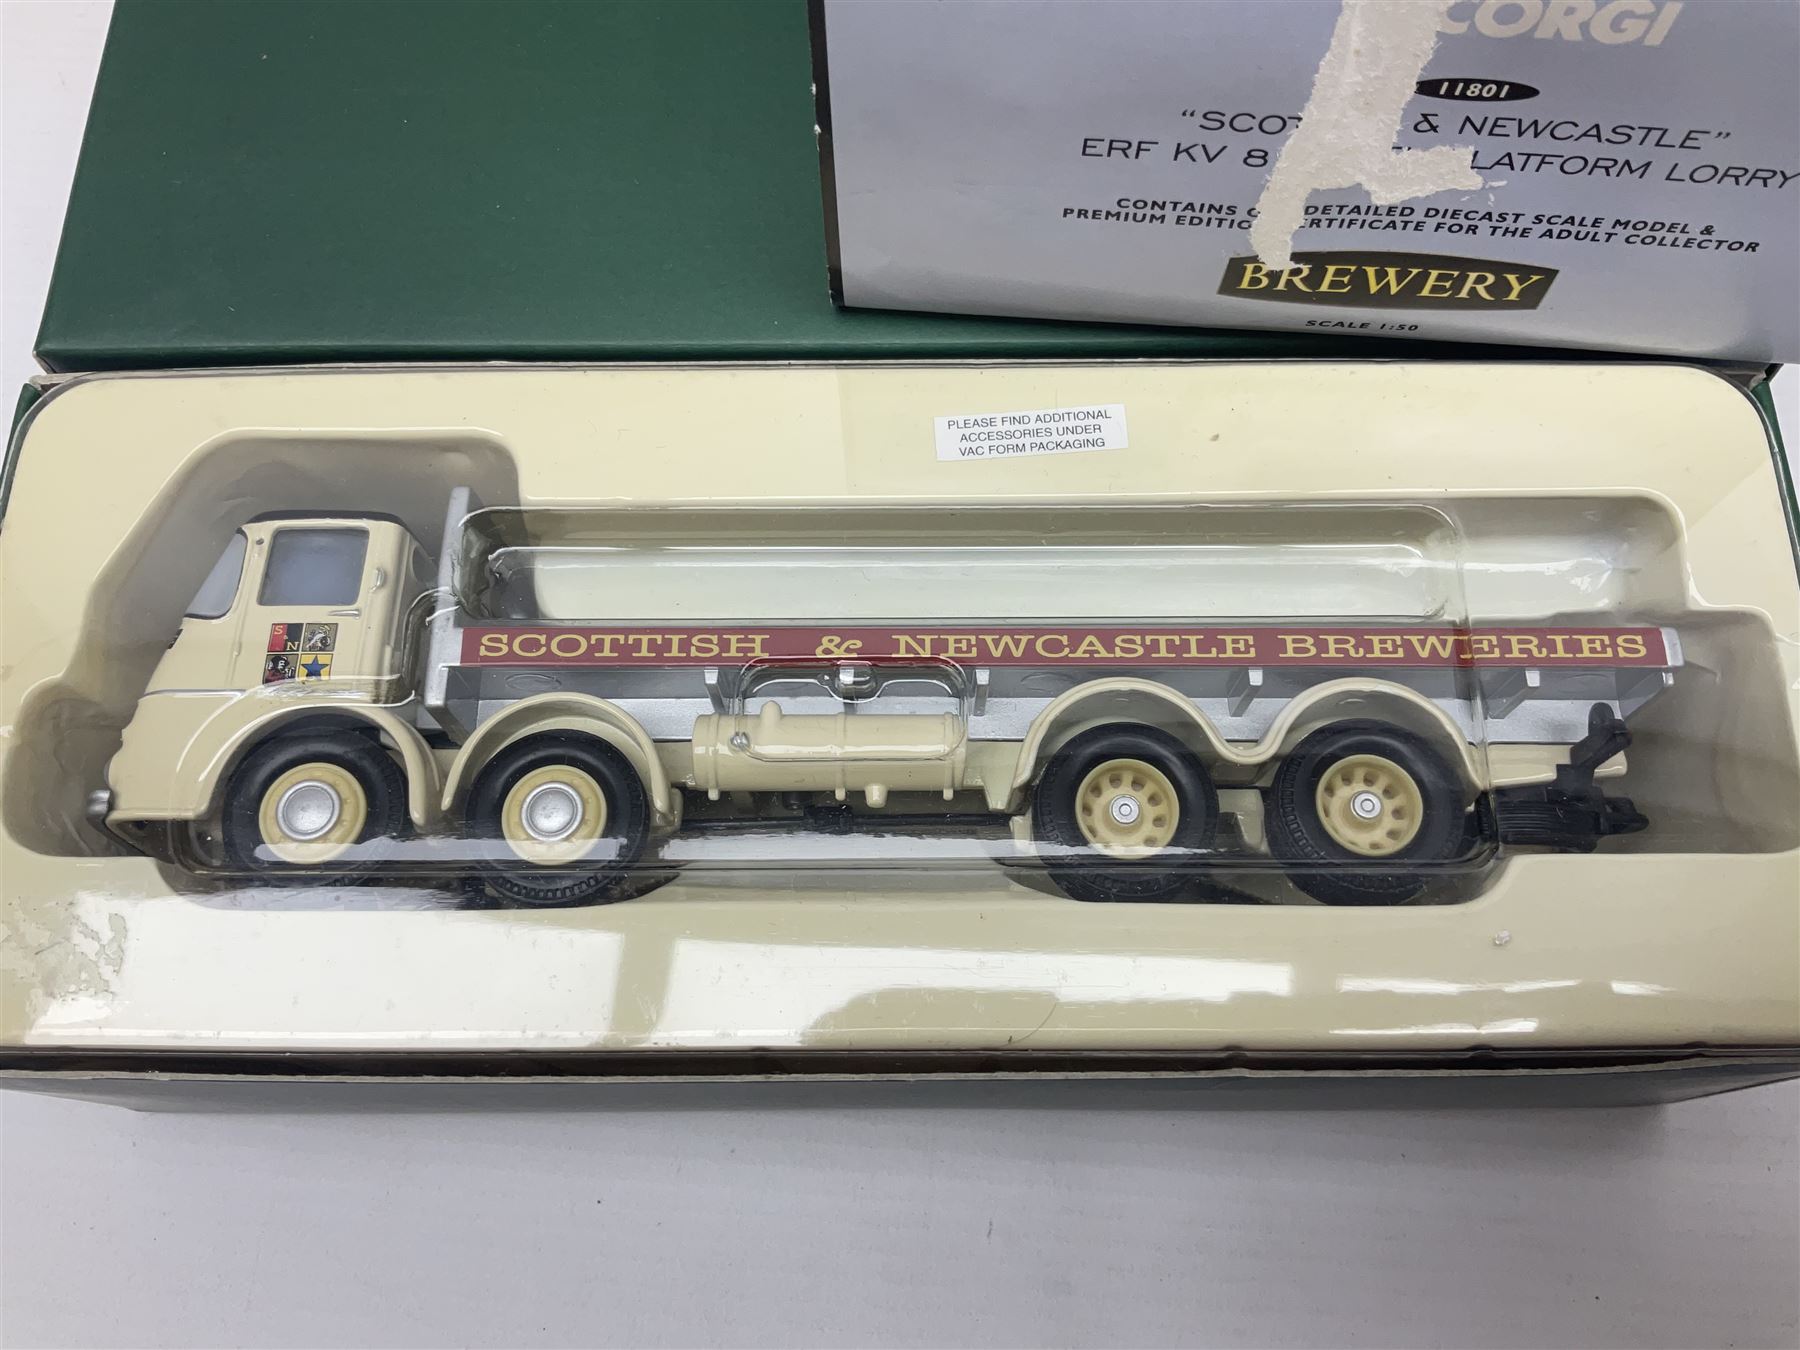 Eight Corgi die-cast models - four limited edition Vintage Glory of Steam Nos.80002 - Image 6 of 13